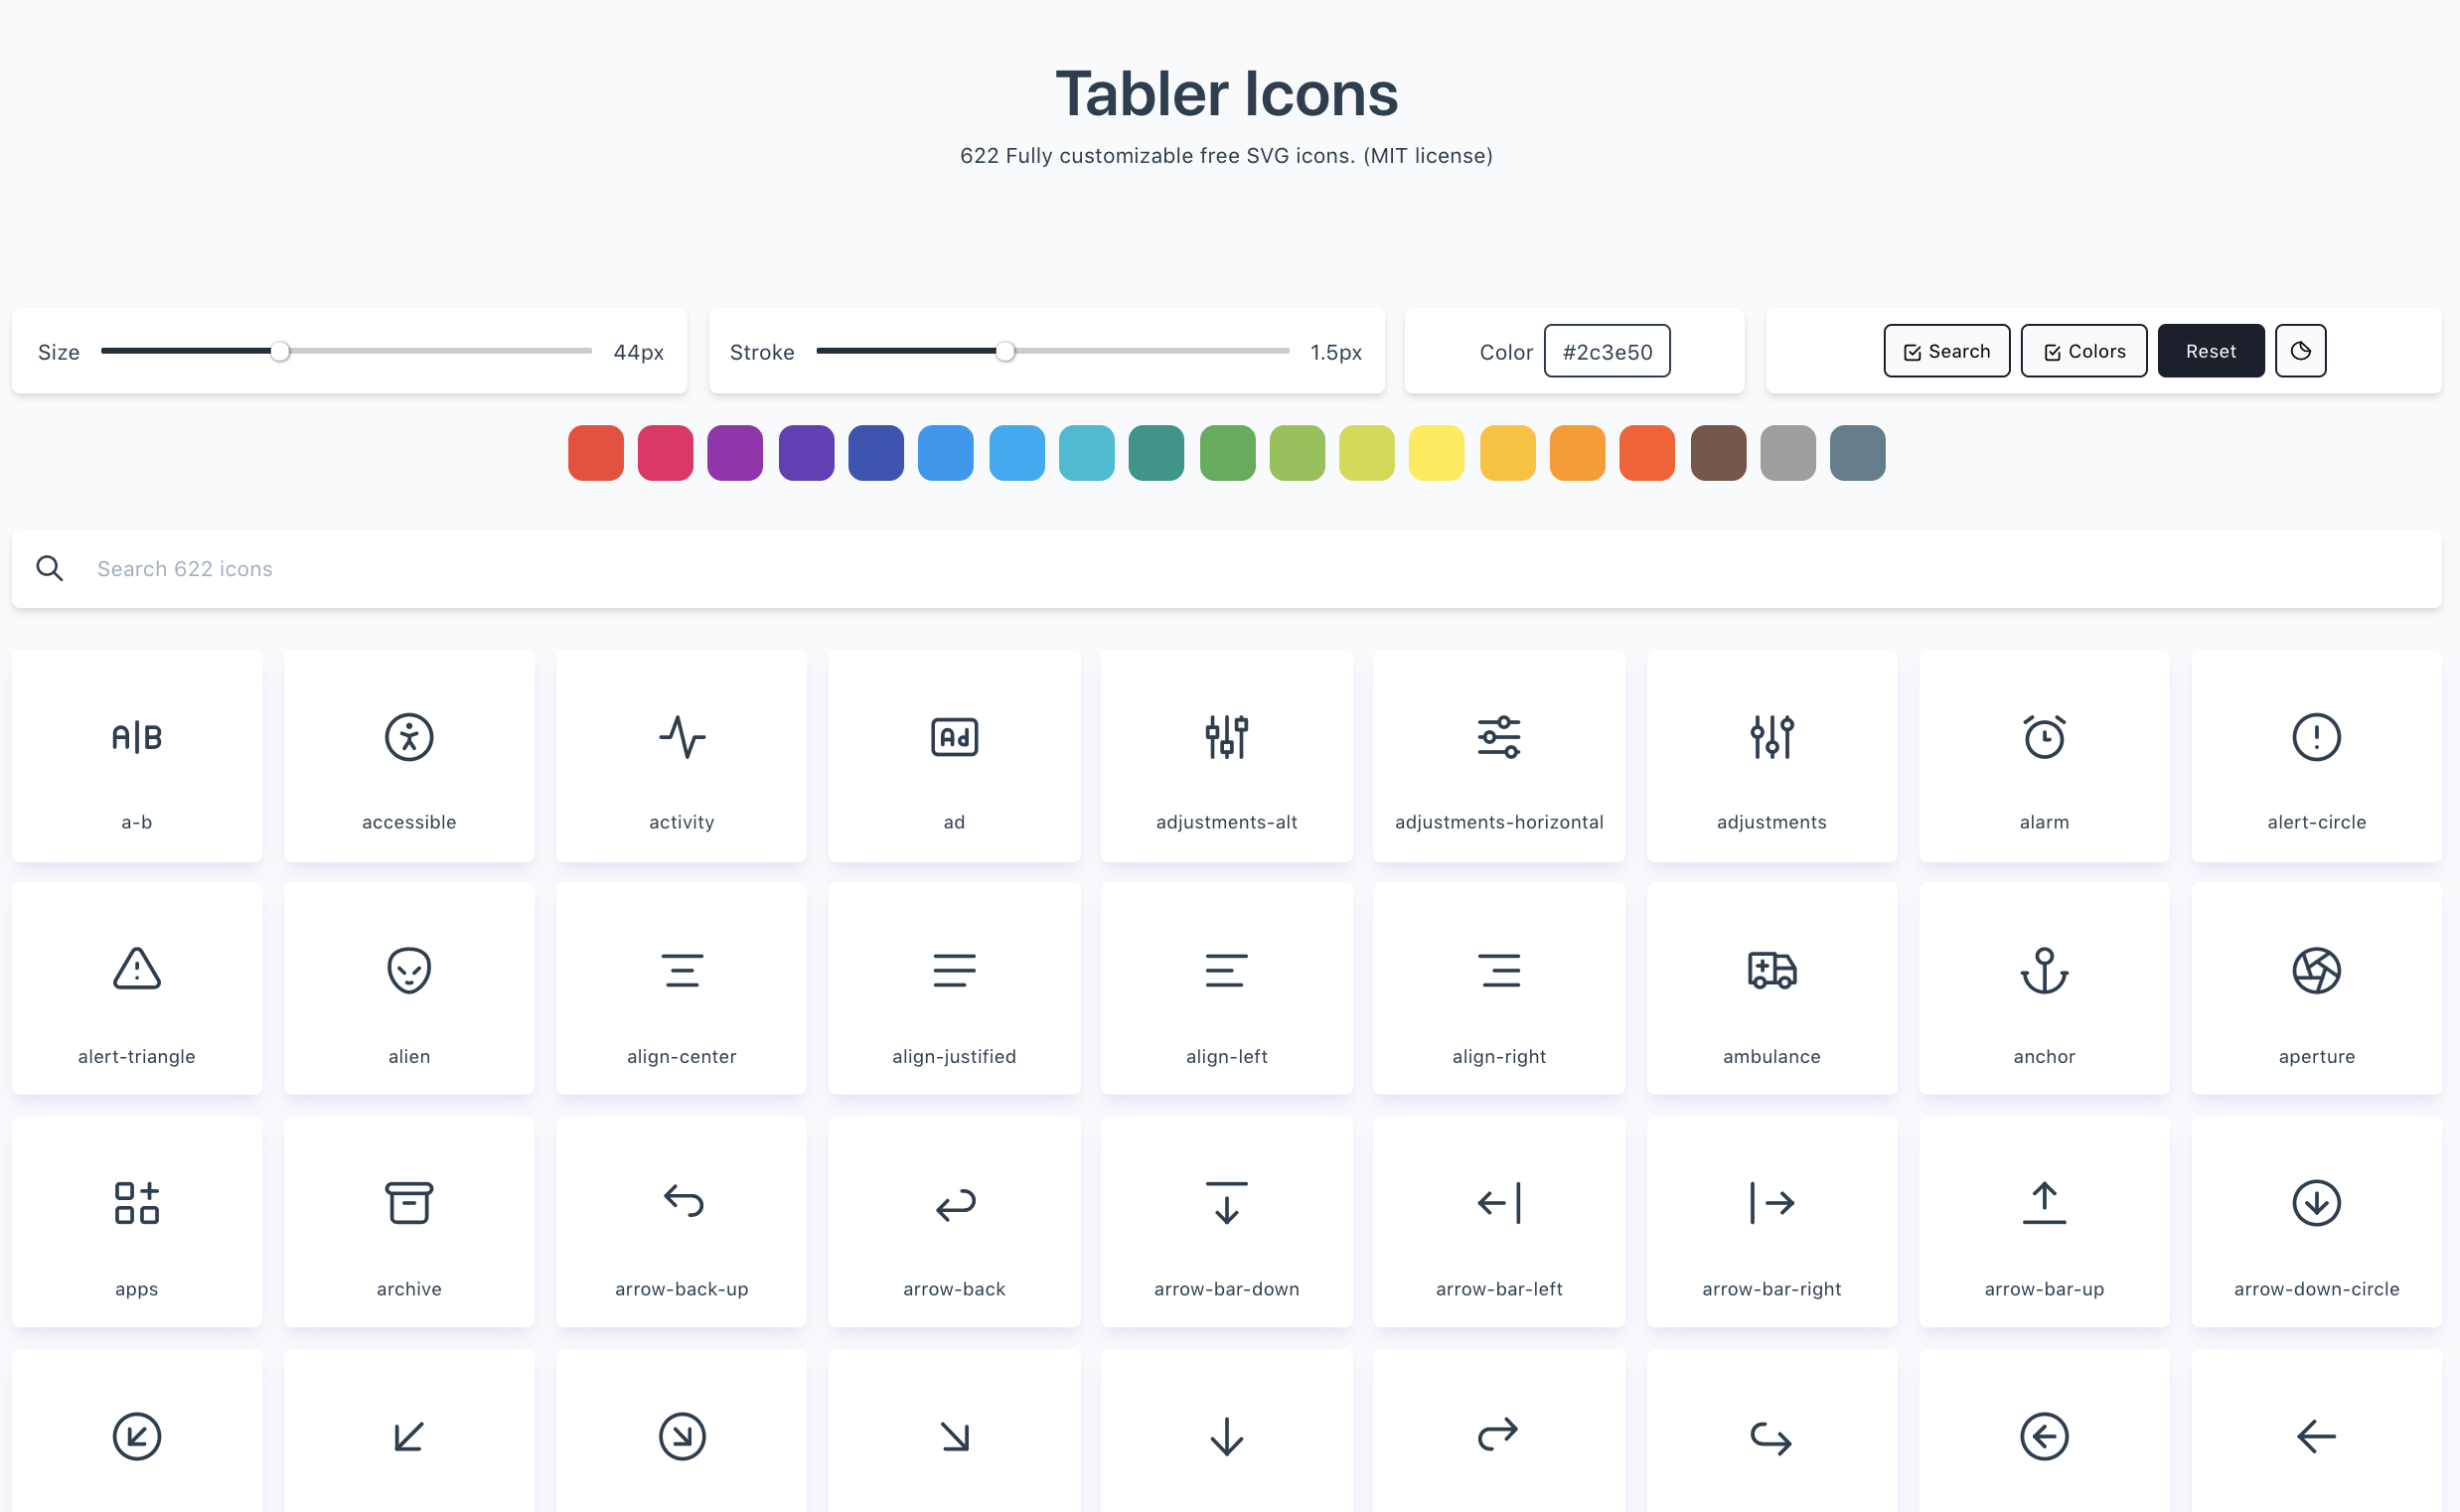 TABLER ICONS